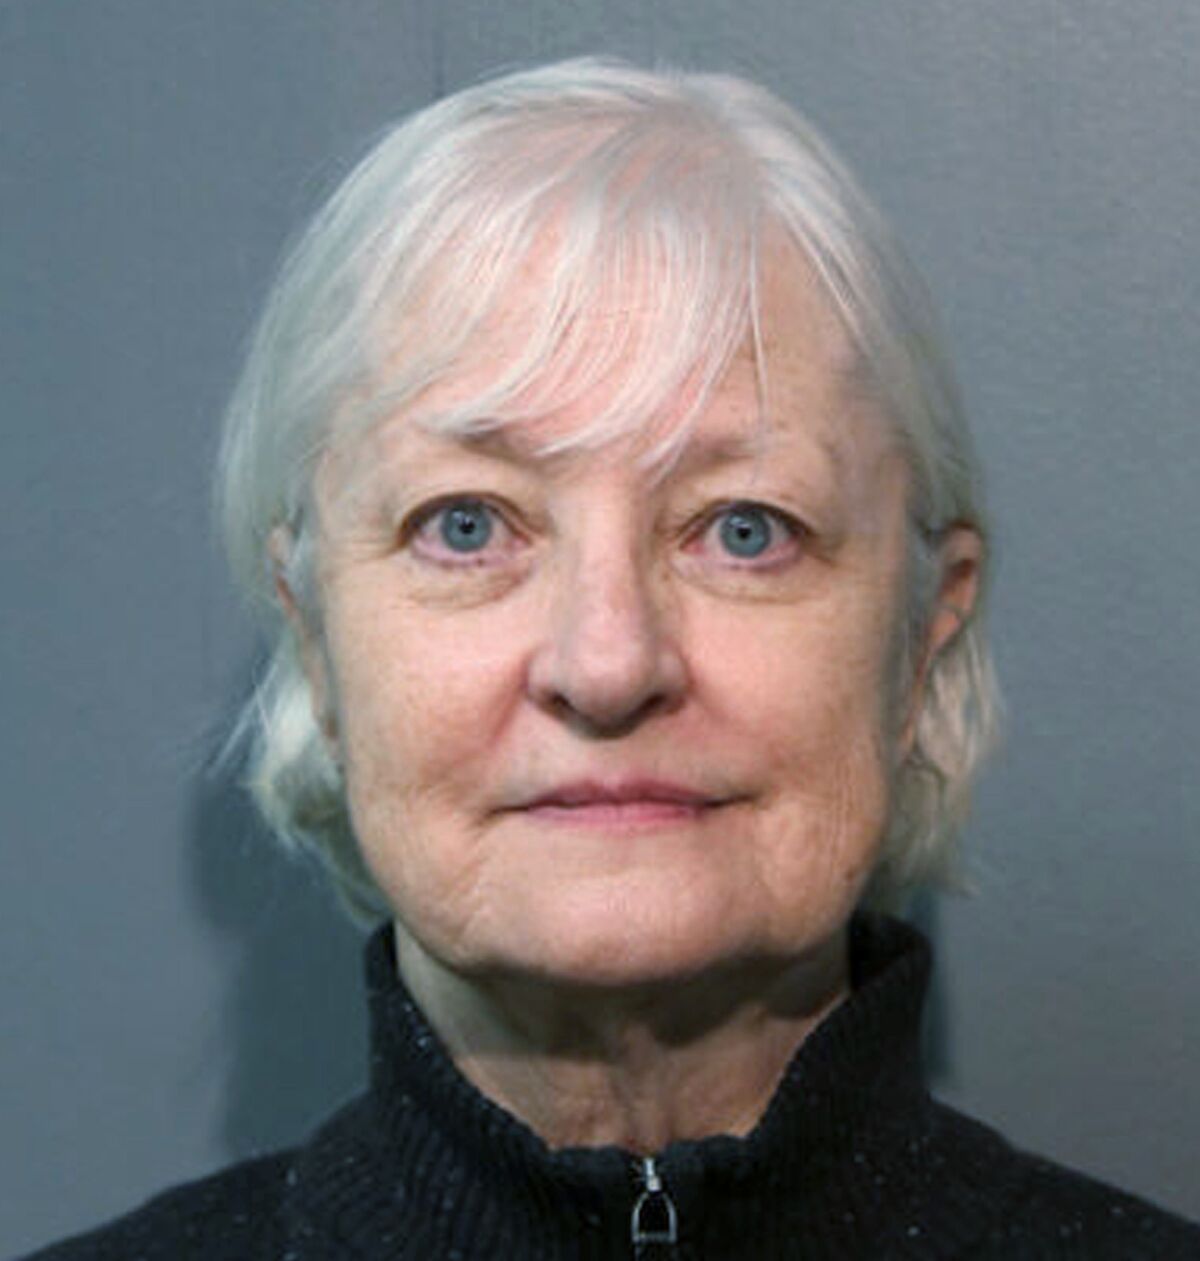 FILE - This January 2018, file photo provided by the Chicago Police Department shows Marilyn Hartman. The 70-year-old woman with a history of slipping past security at airports and sneaking onto flights was sentenced on Thursday, March 3, 2022, to more than three years in prison for trespassing at Chicago's O'Hare International Airport in 2019. (Chicago Police Department via AP, File)